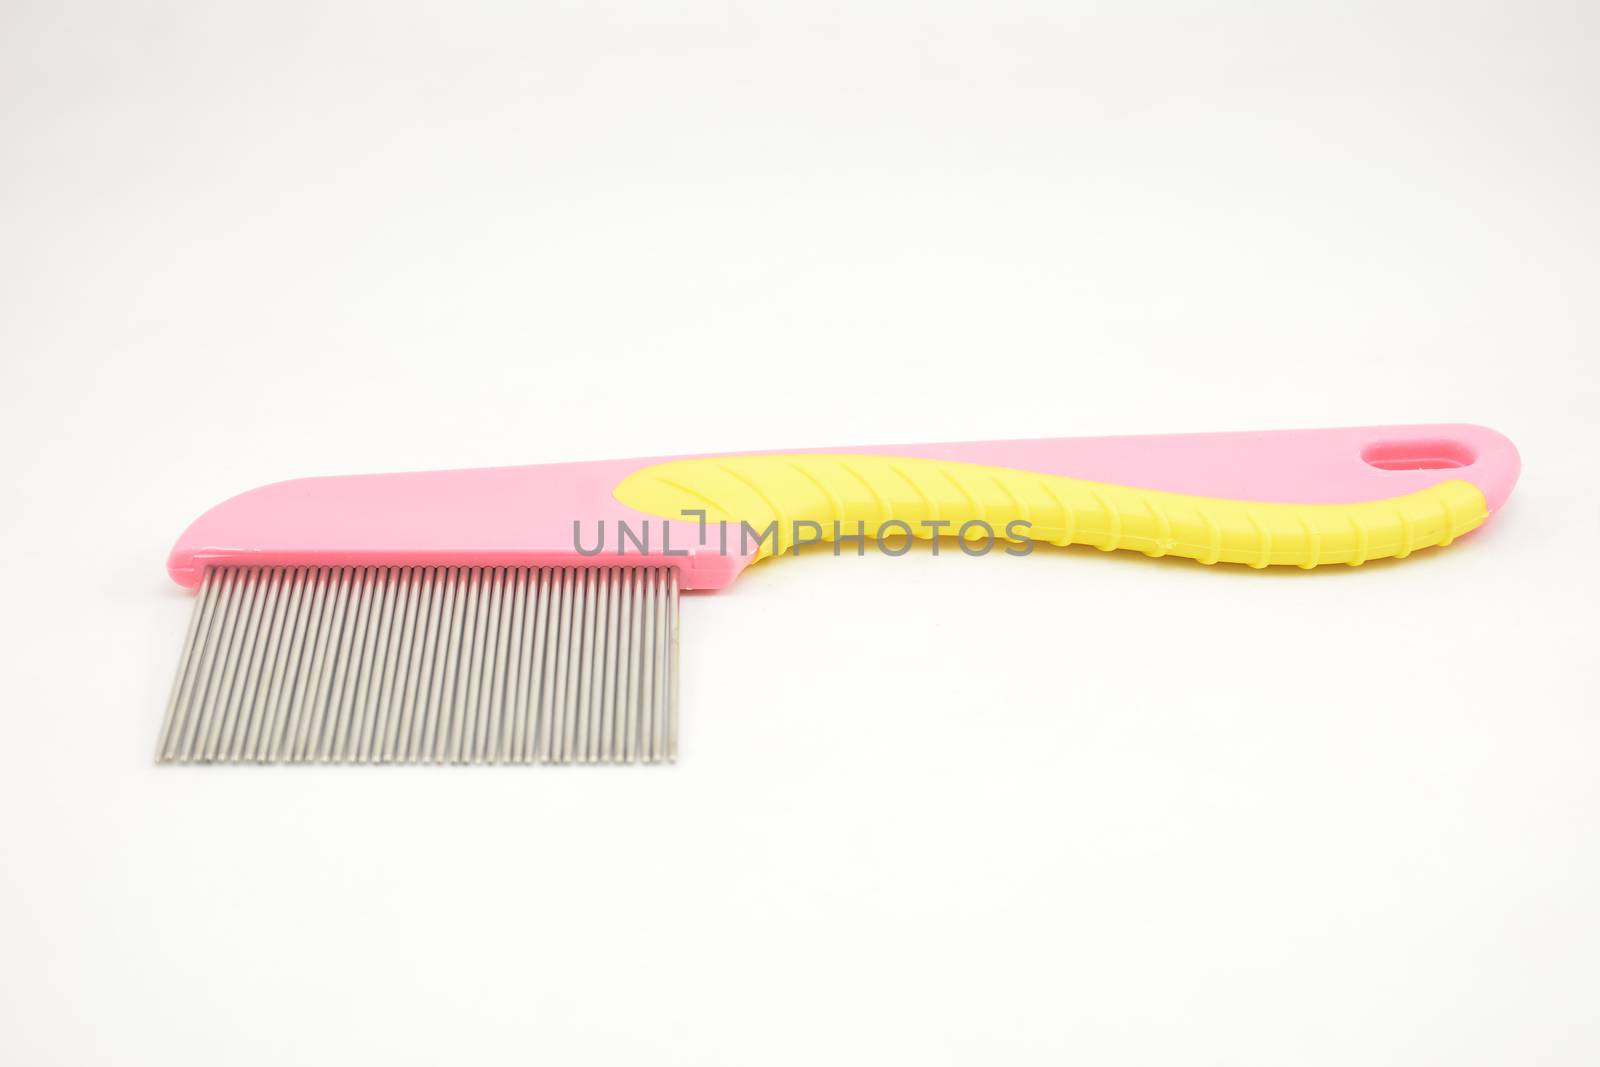 Lice comb stainless steel tooth pink and yellow handle by imwaltersy